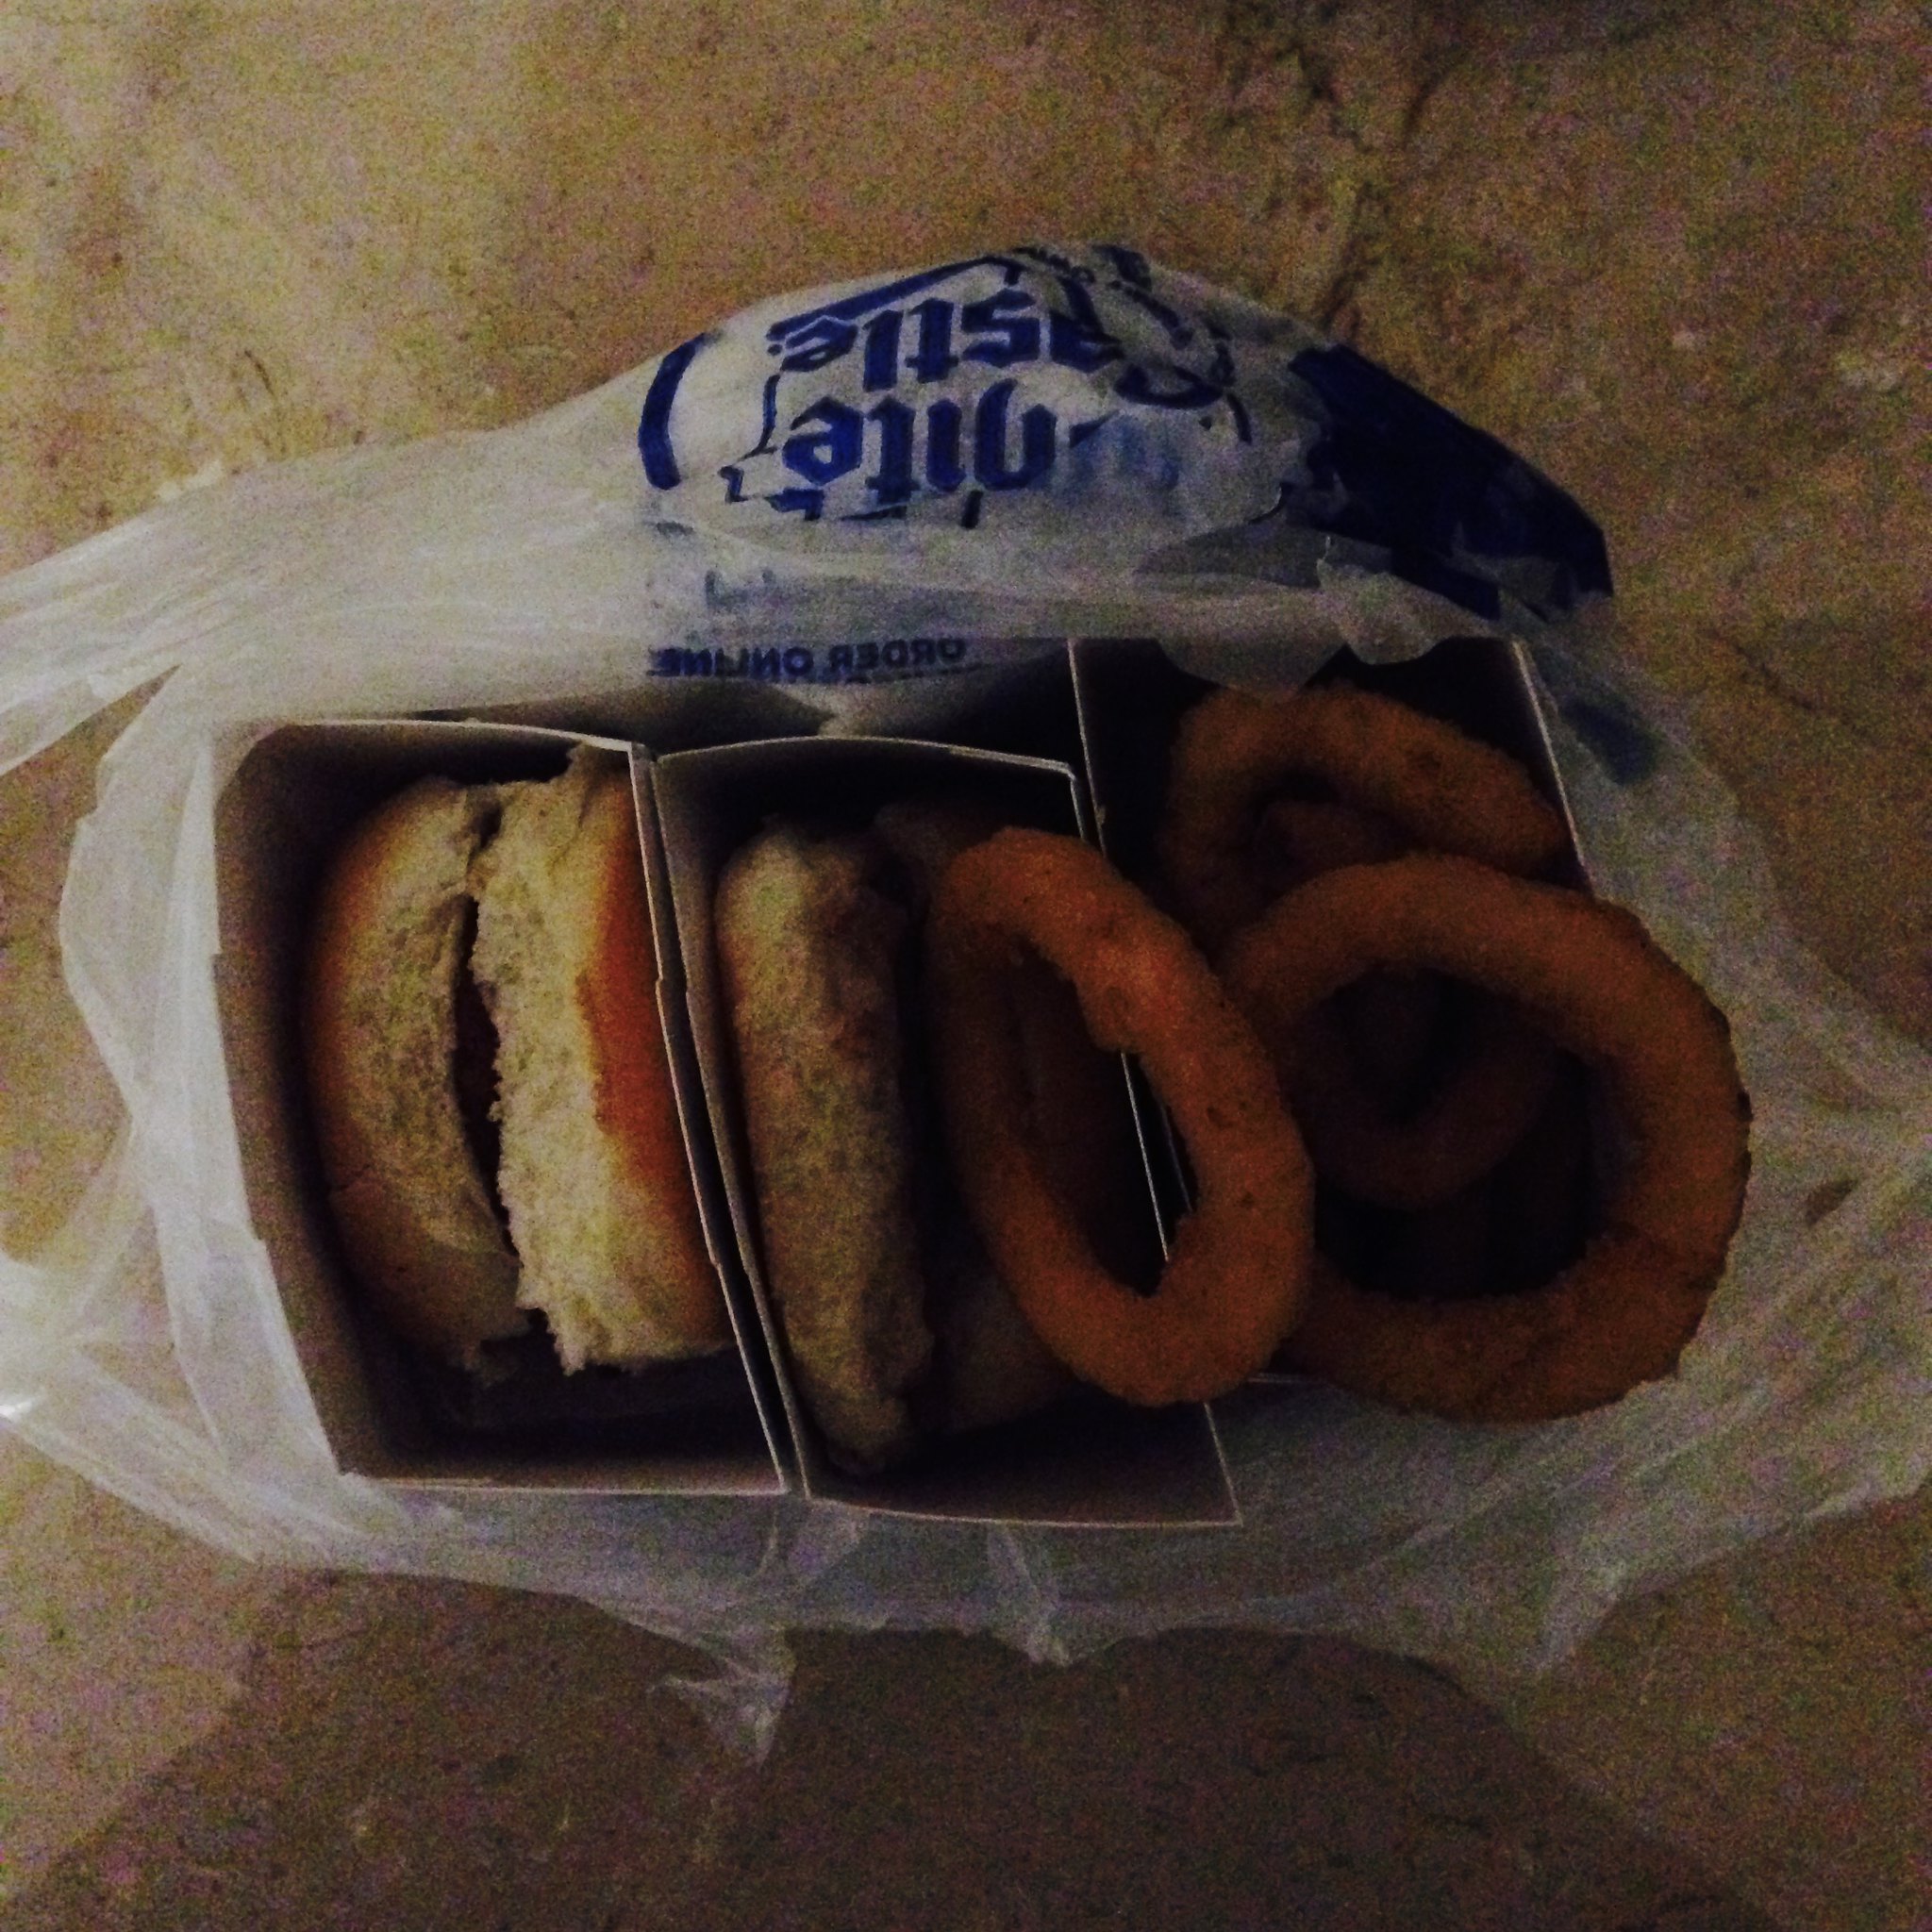 White Castle - so disgusting, but I had to do it